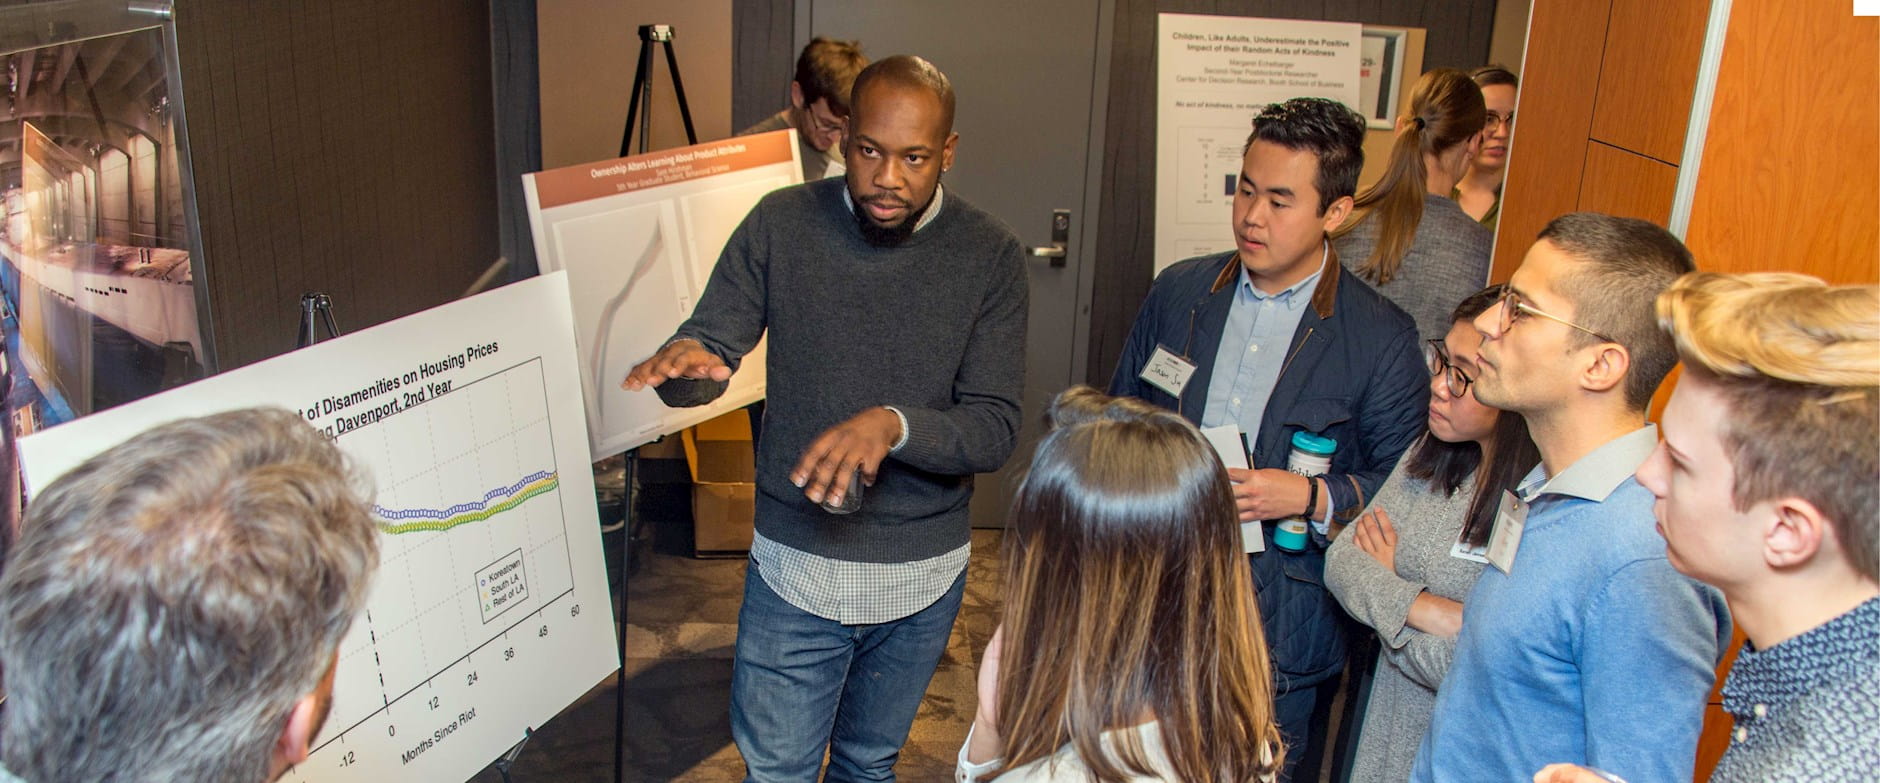 Person presenting behavioral science research on a poster board